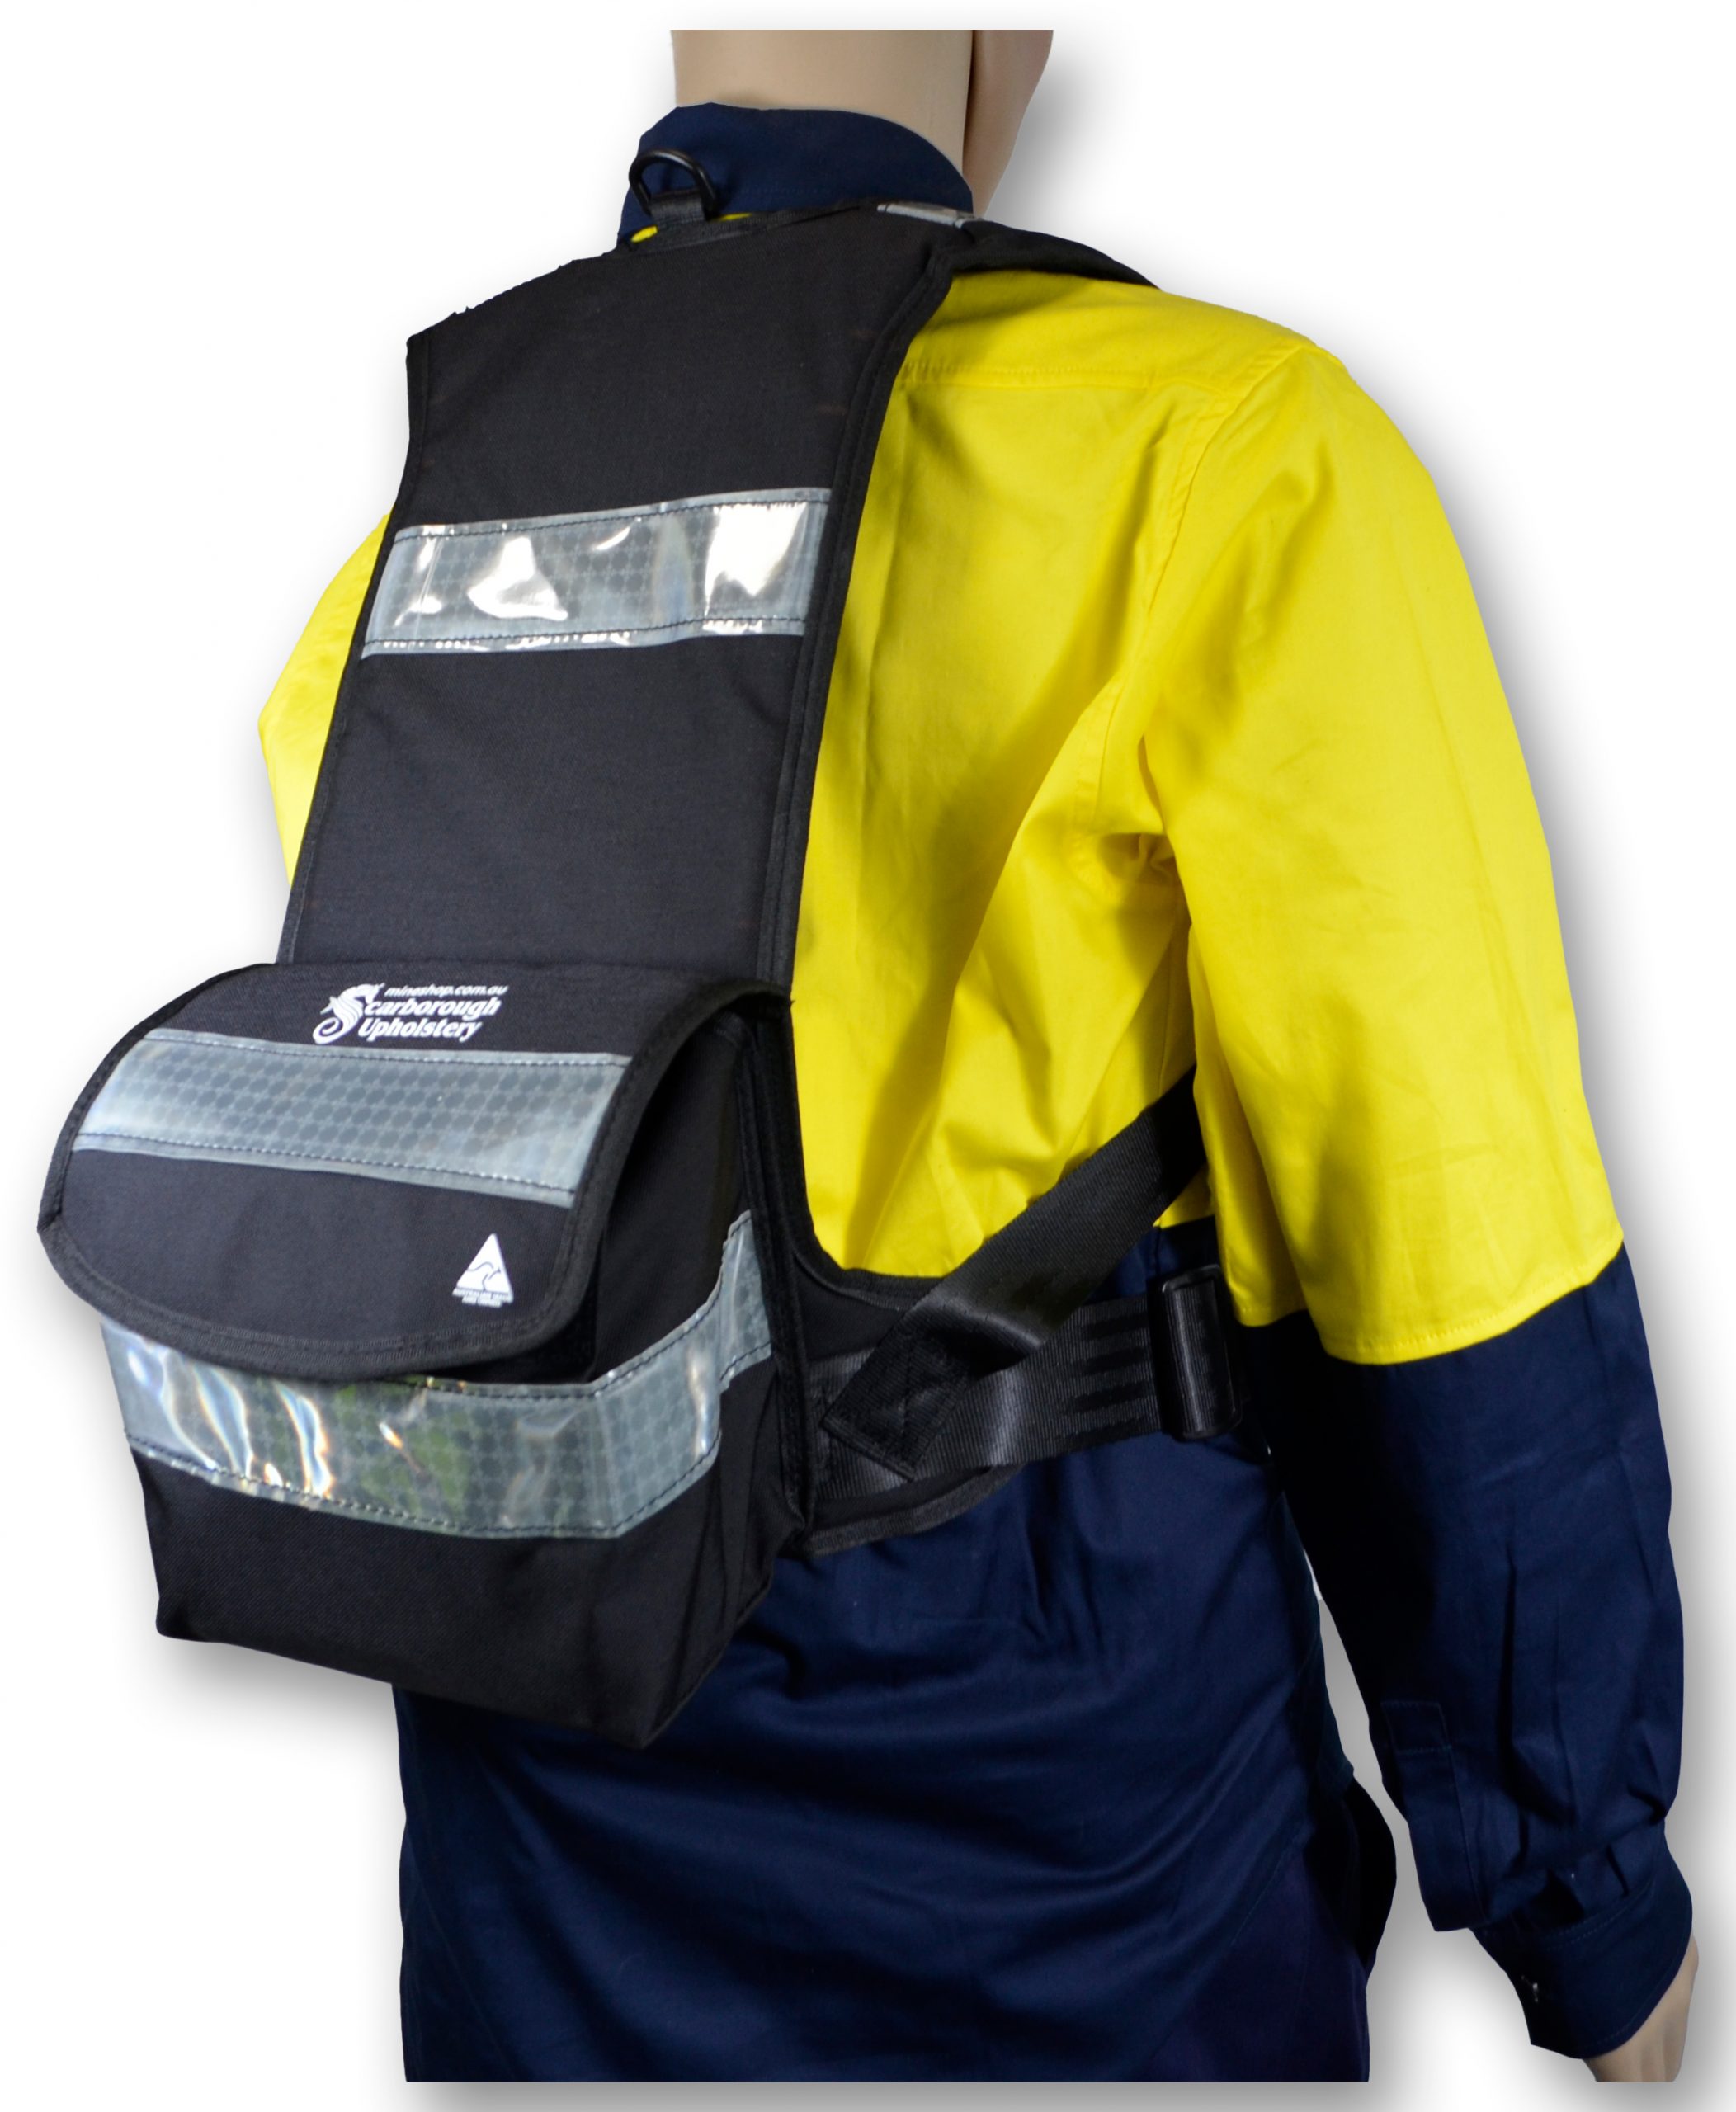 Backpack for OXY3000 Self-Rescue Unit - Custom Mining & Safety Equipment -  Mine Shop